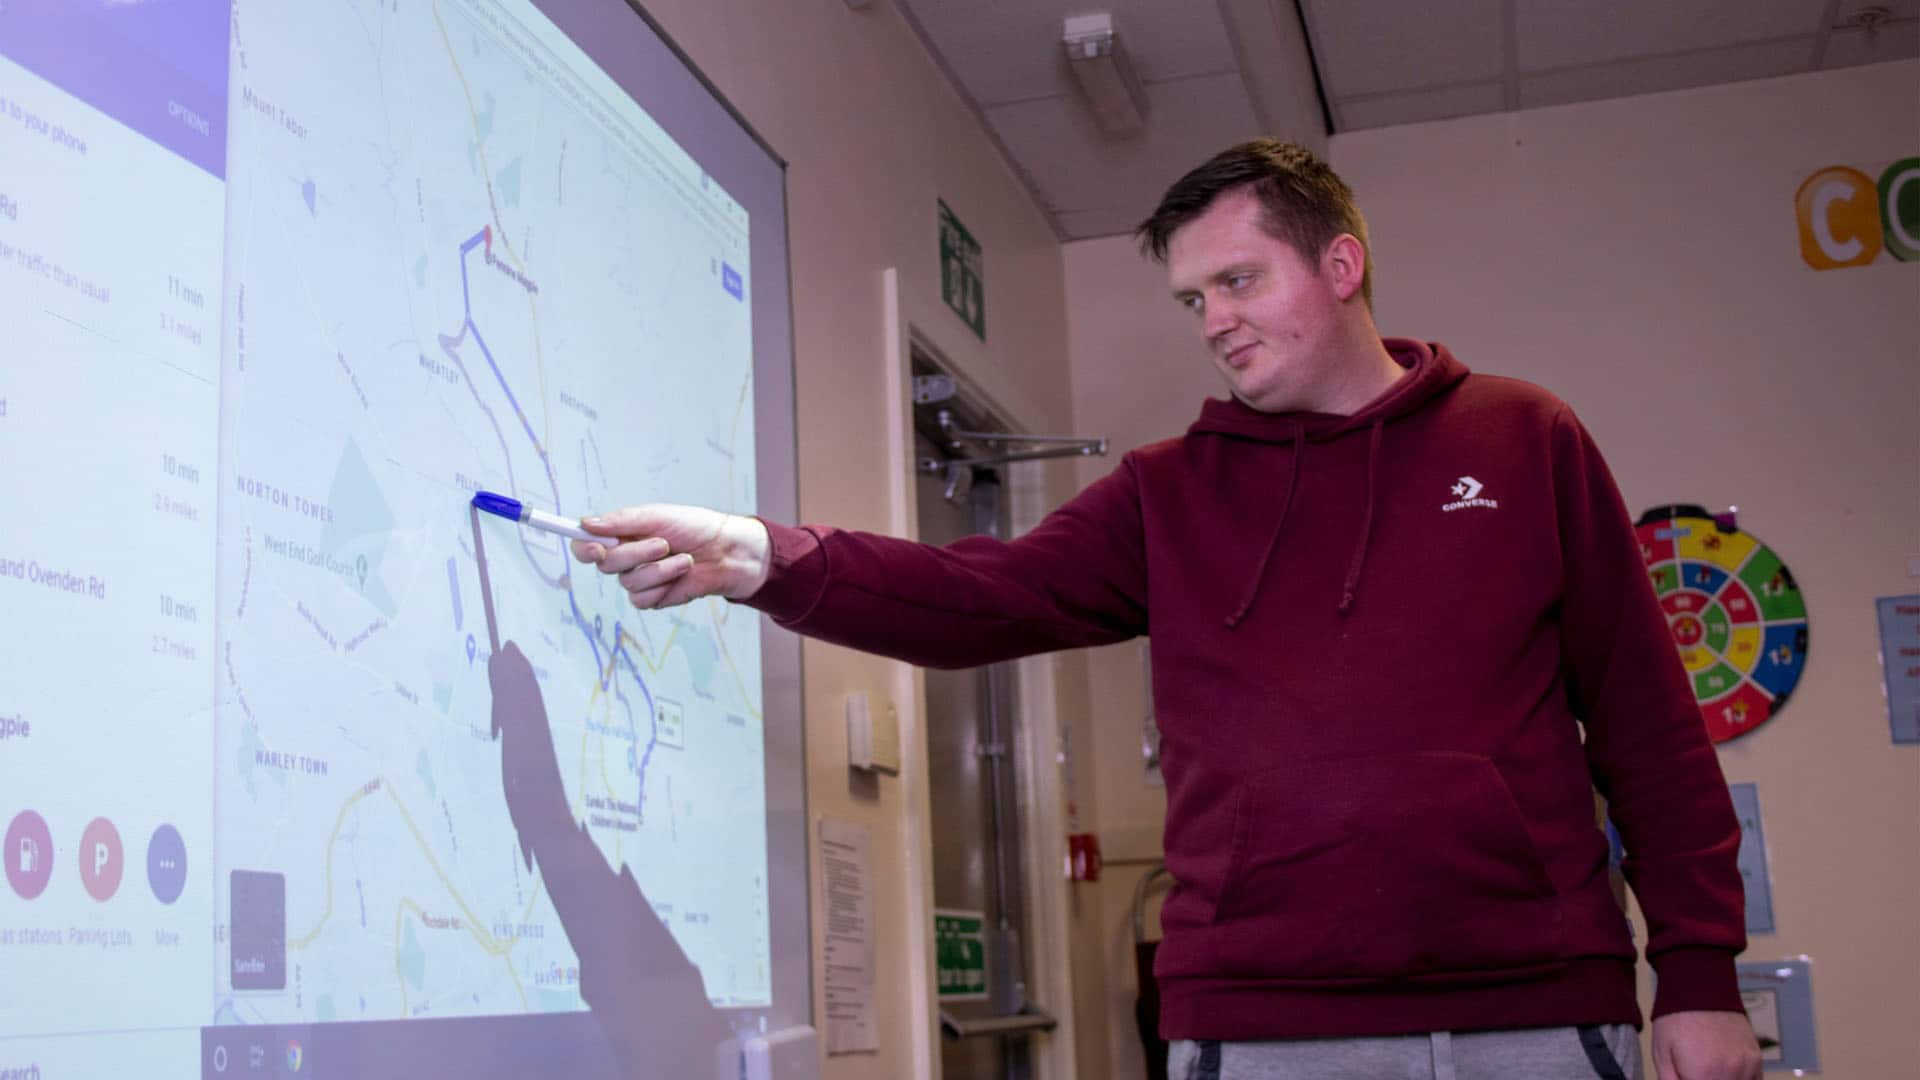 A service user pointing to a spot on a map projected onto a screen